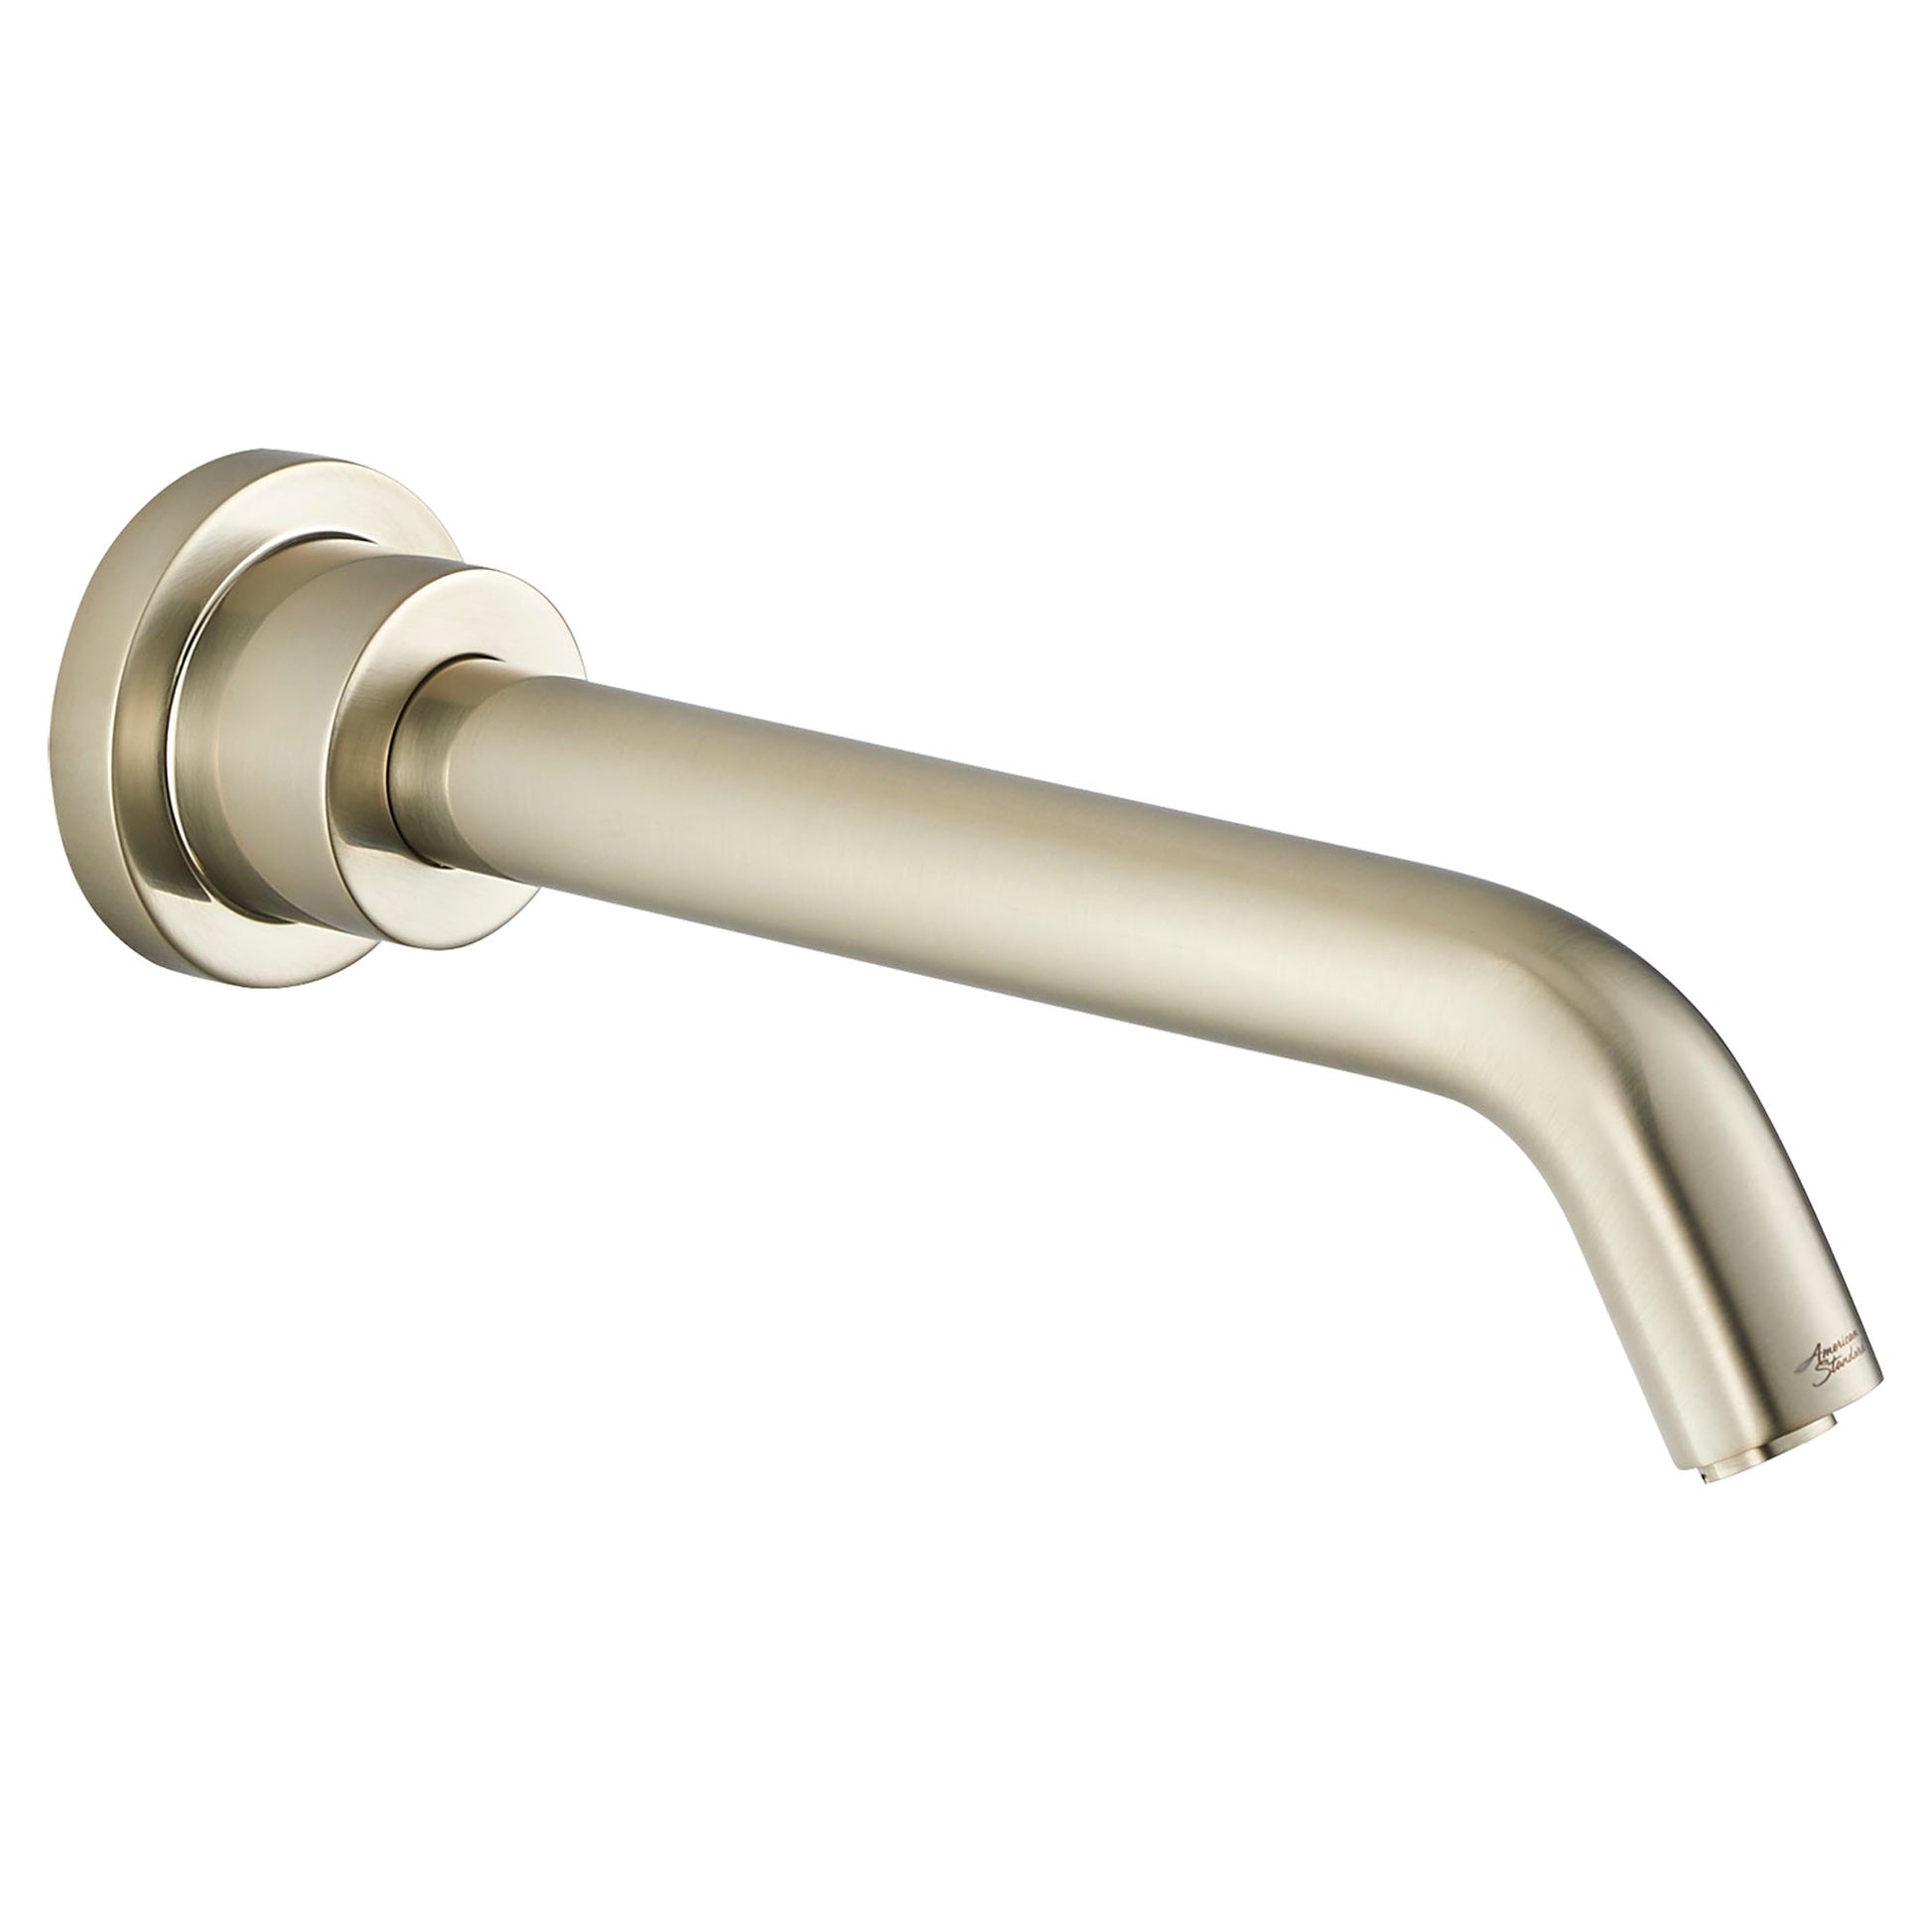 AMERICAN-STANDARD T064356.295, Serin Touchless Wall-Mount Trim, Battery-Powered, 0.35 gpm/1.3 Lpm in Brushed Nickel